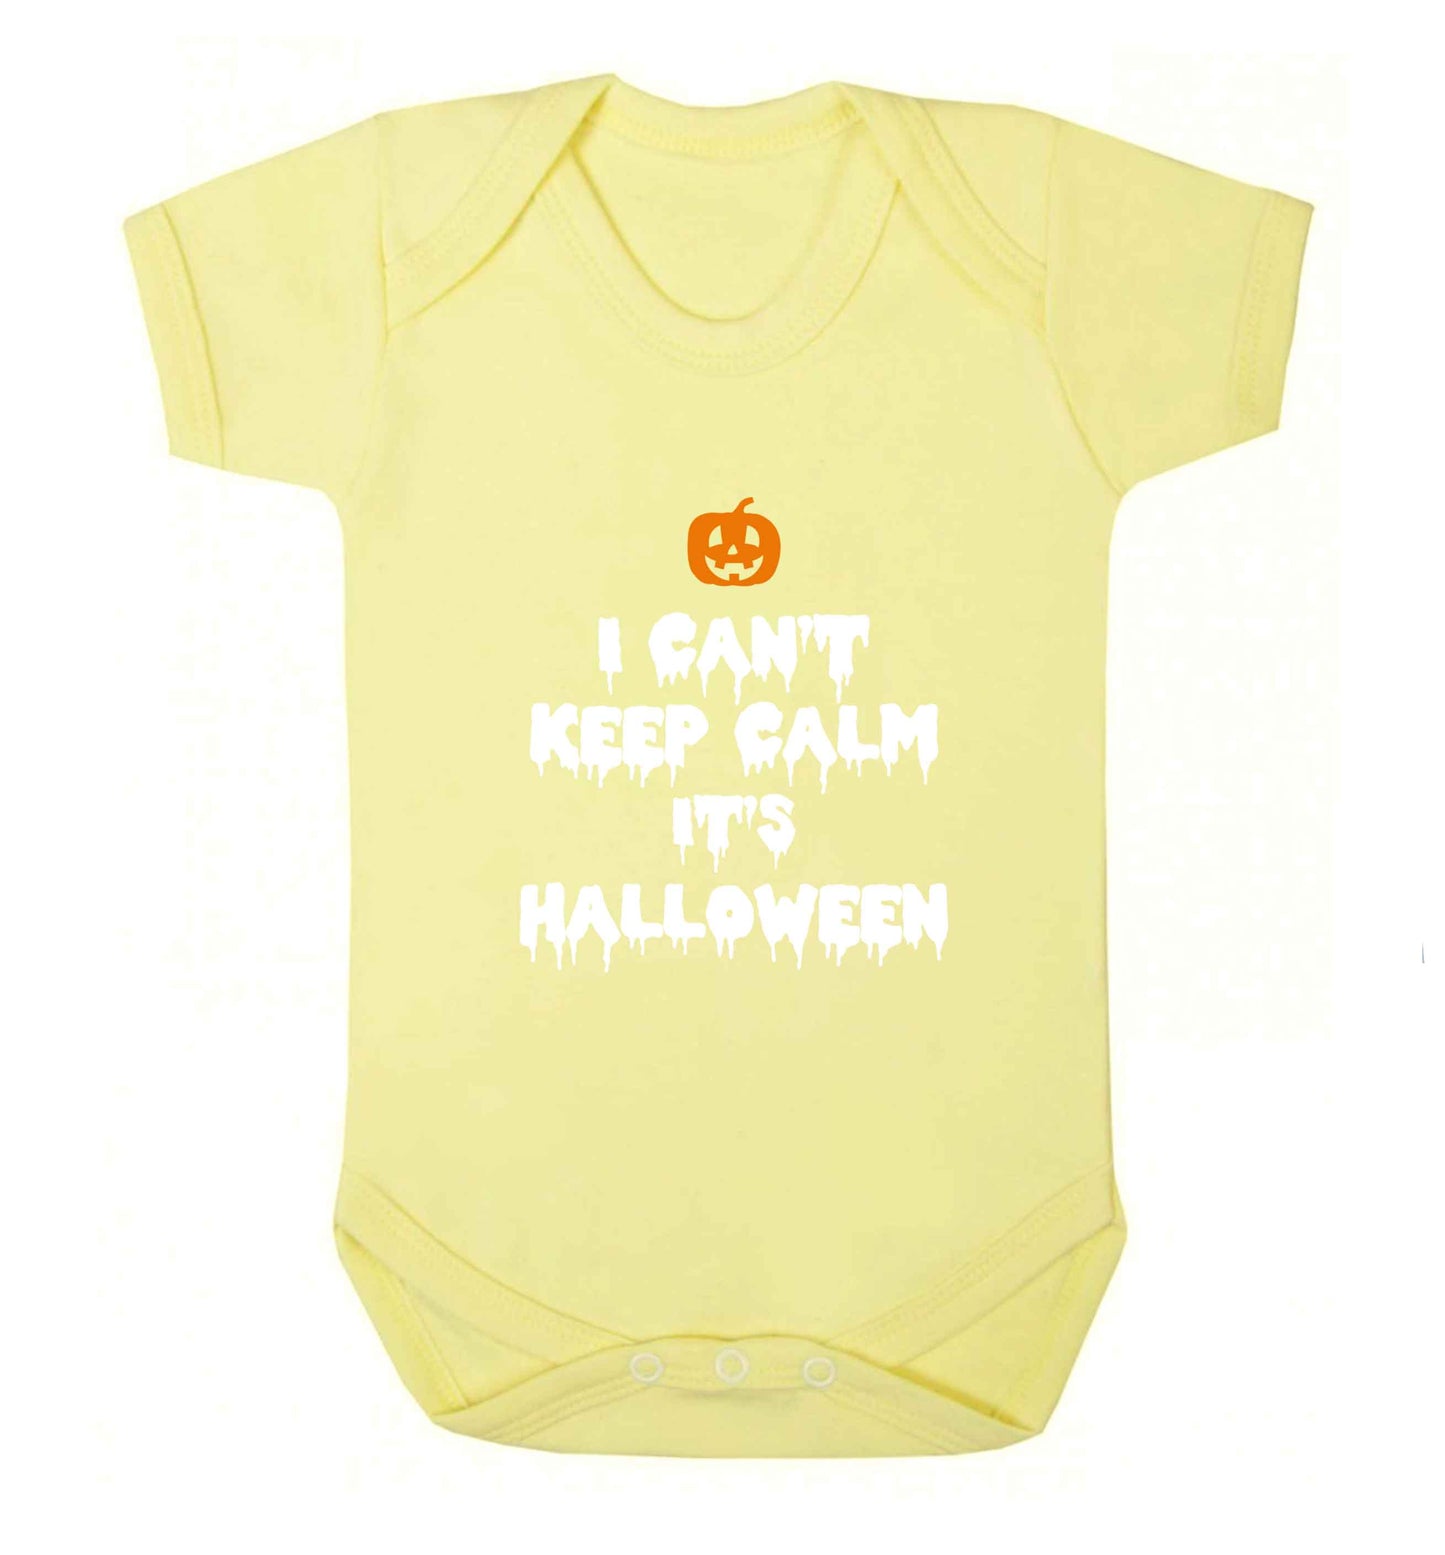 I can't keep calm it's halloween baby vest pale yellow 18-24 months